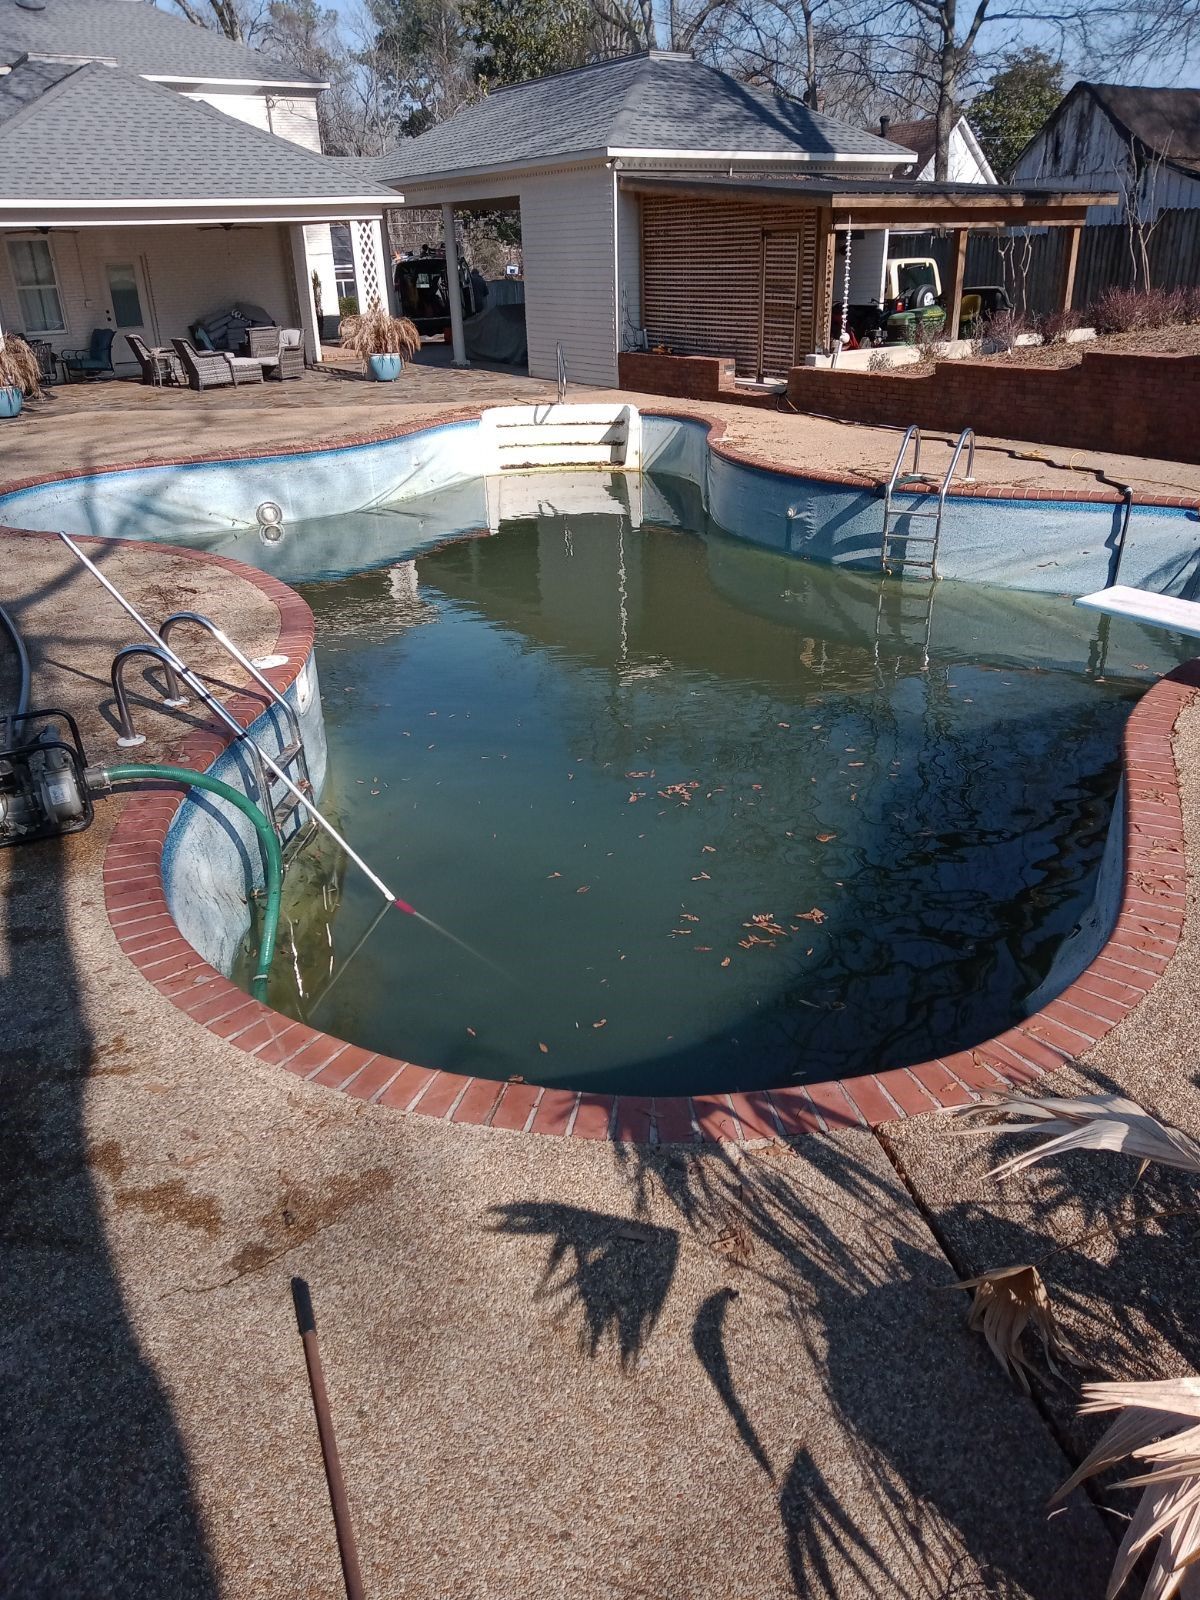 An empty swimming pool is sitting in the backyard of a house.